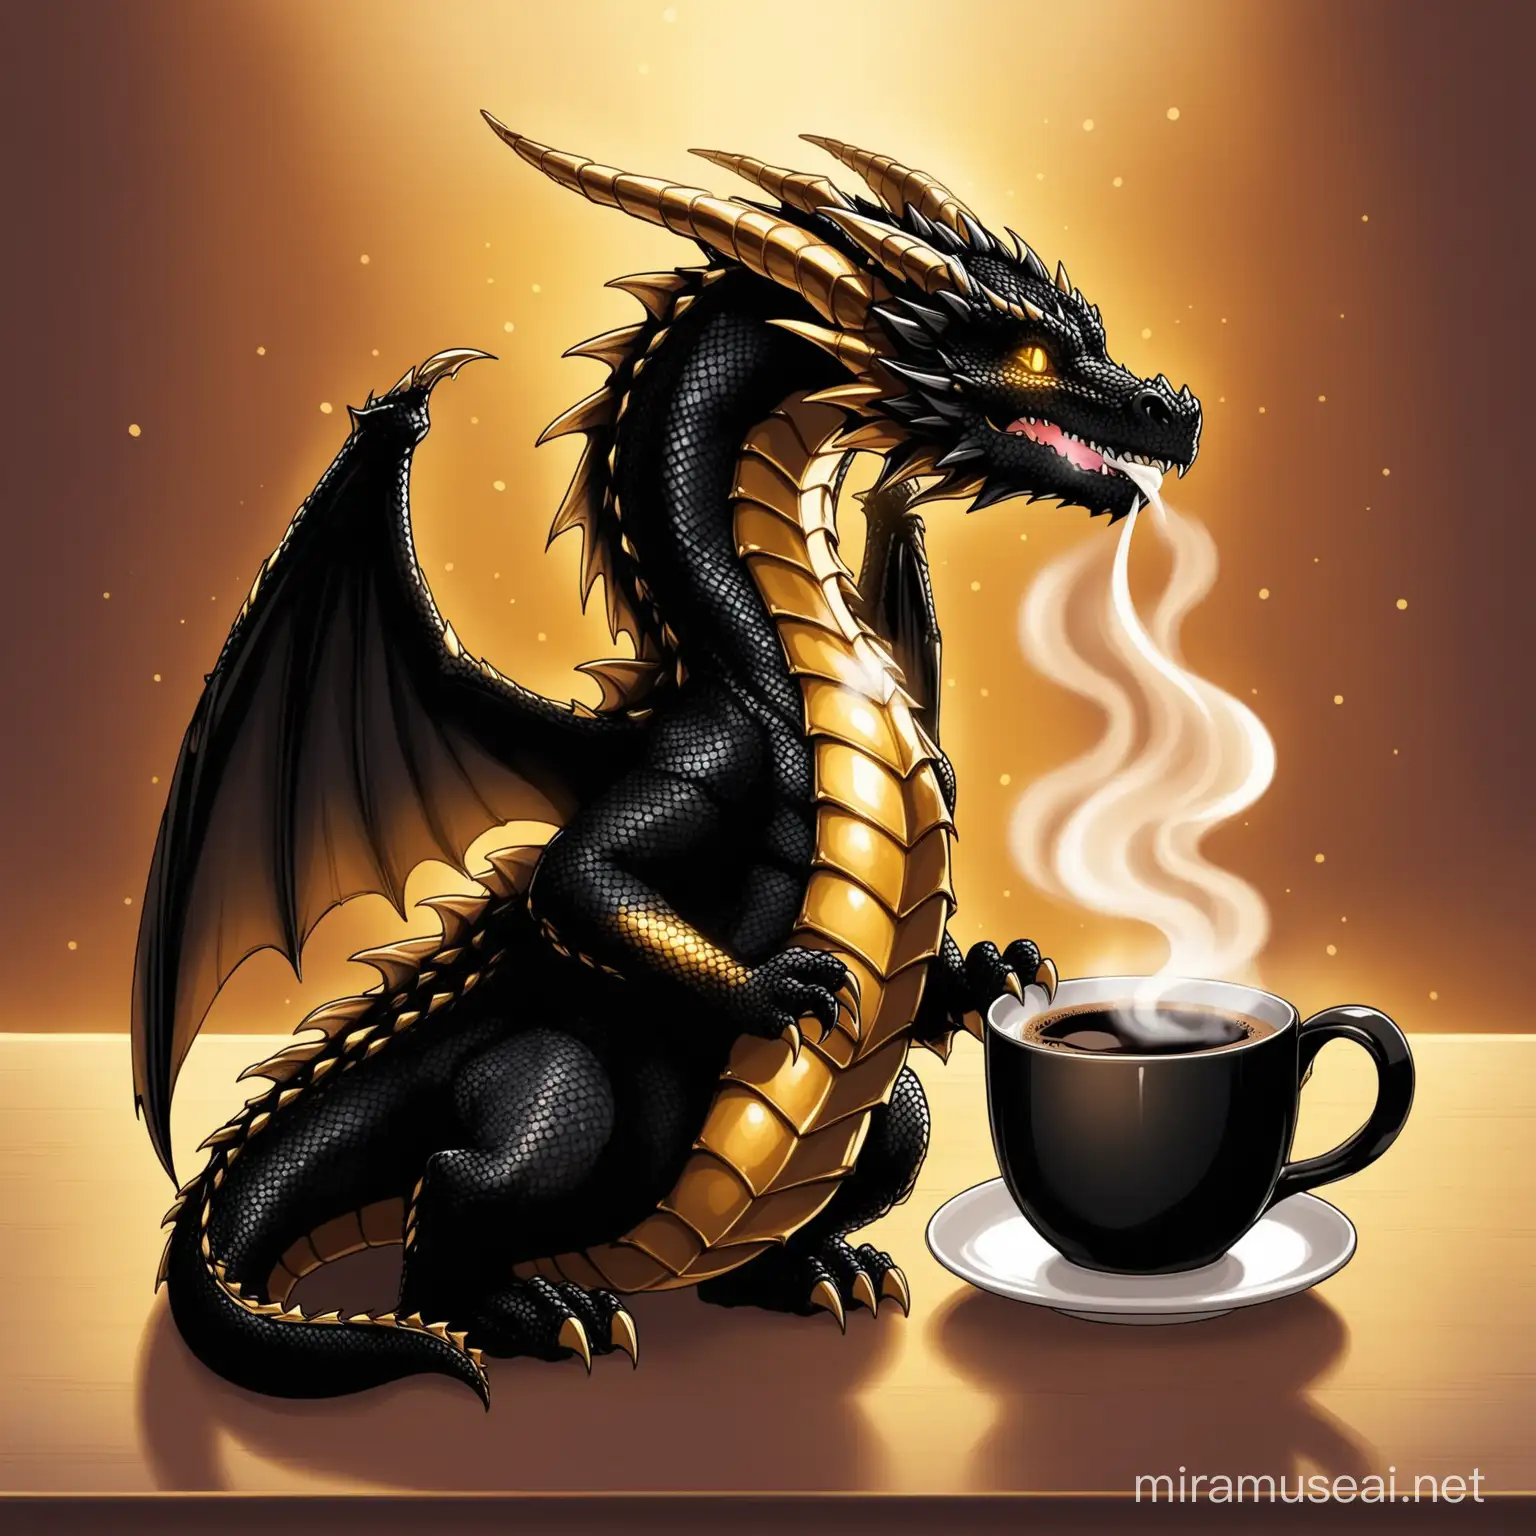 Charming Black and Gold Dragon Warming Coffee Cup